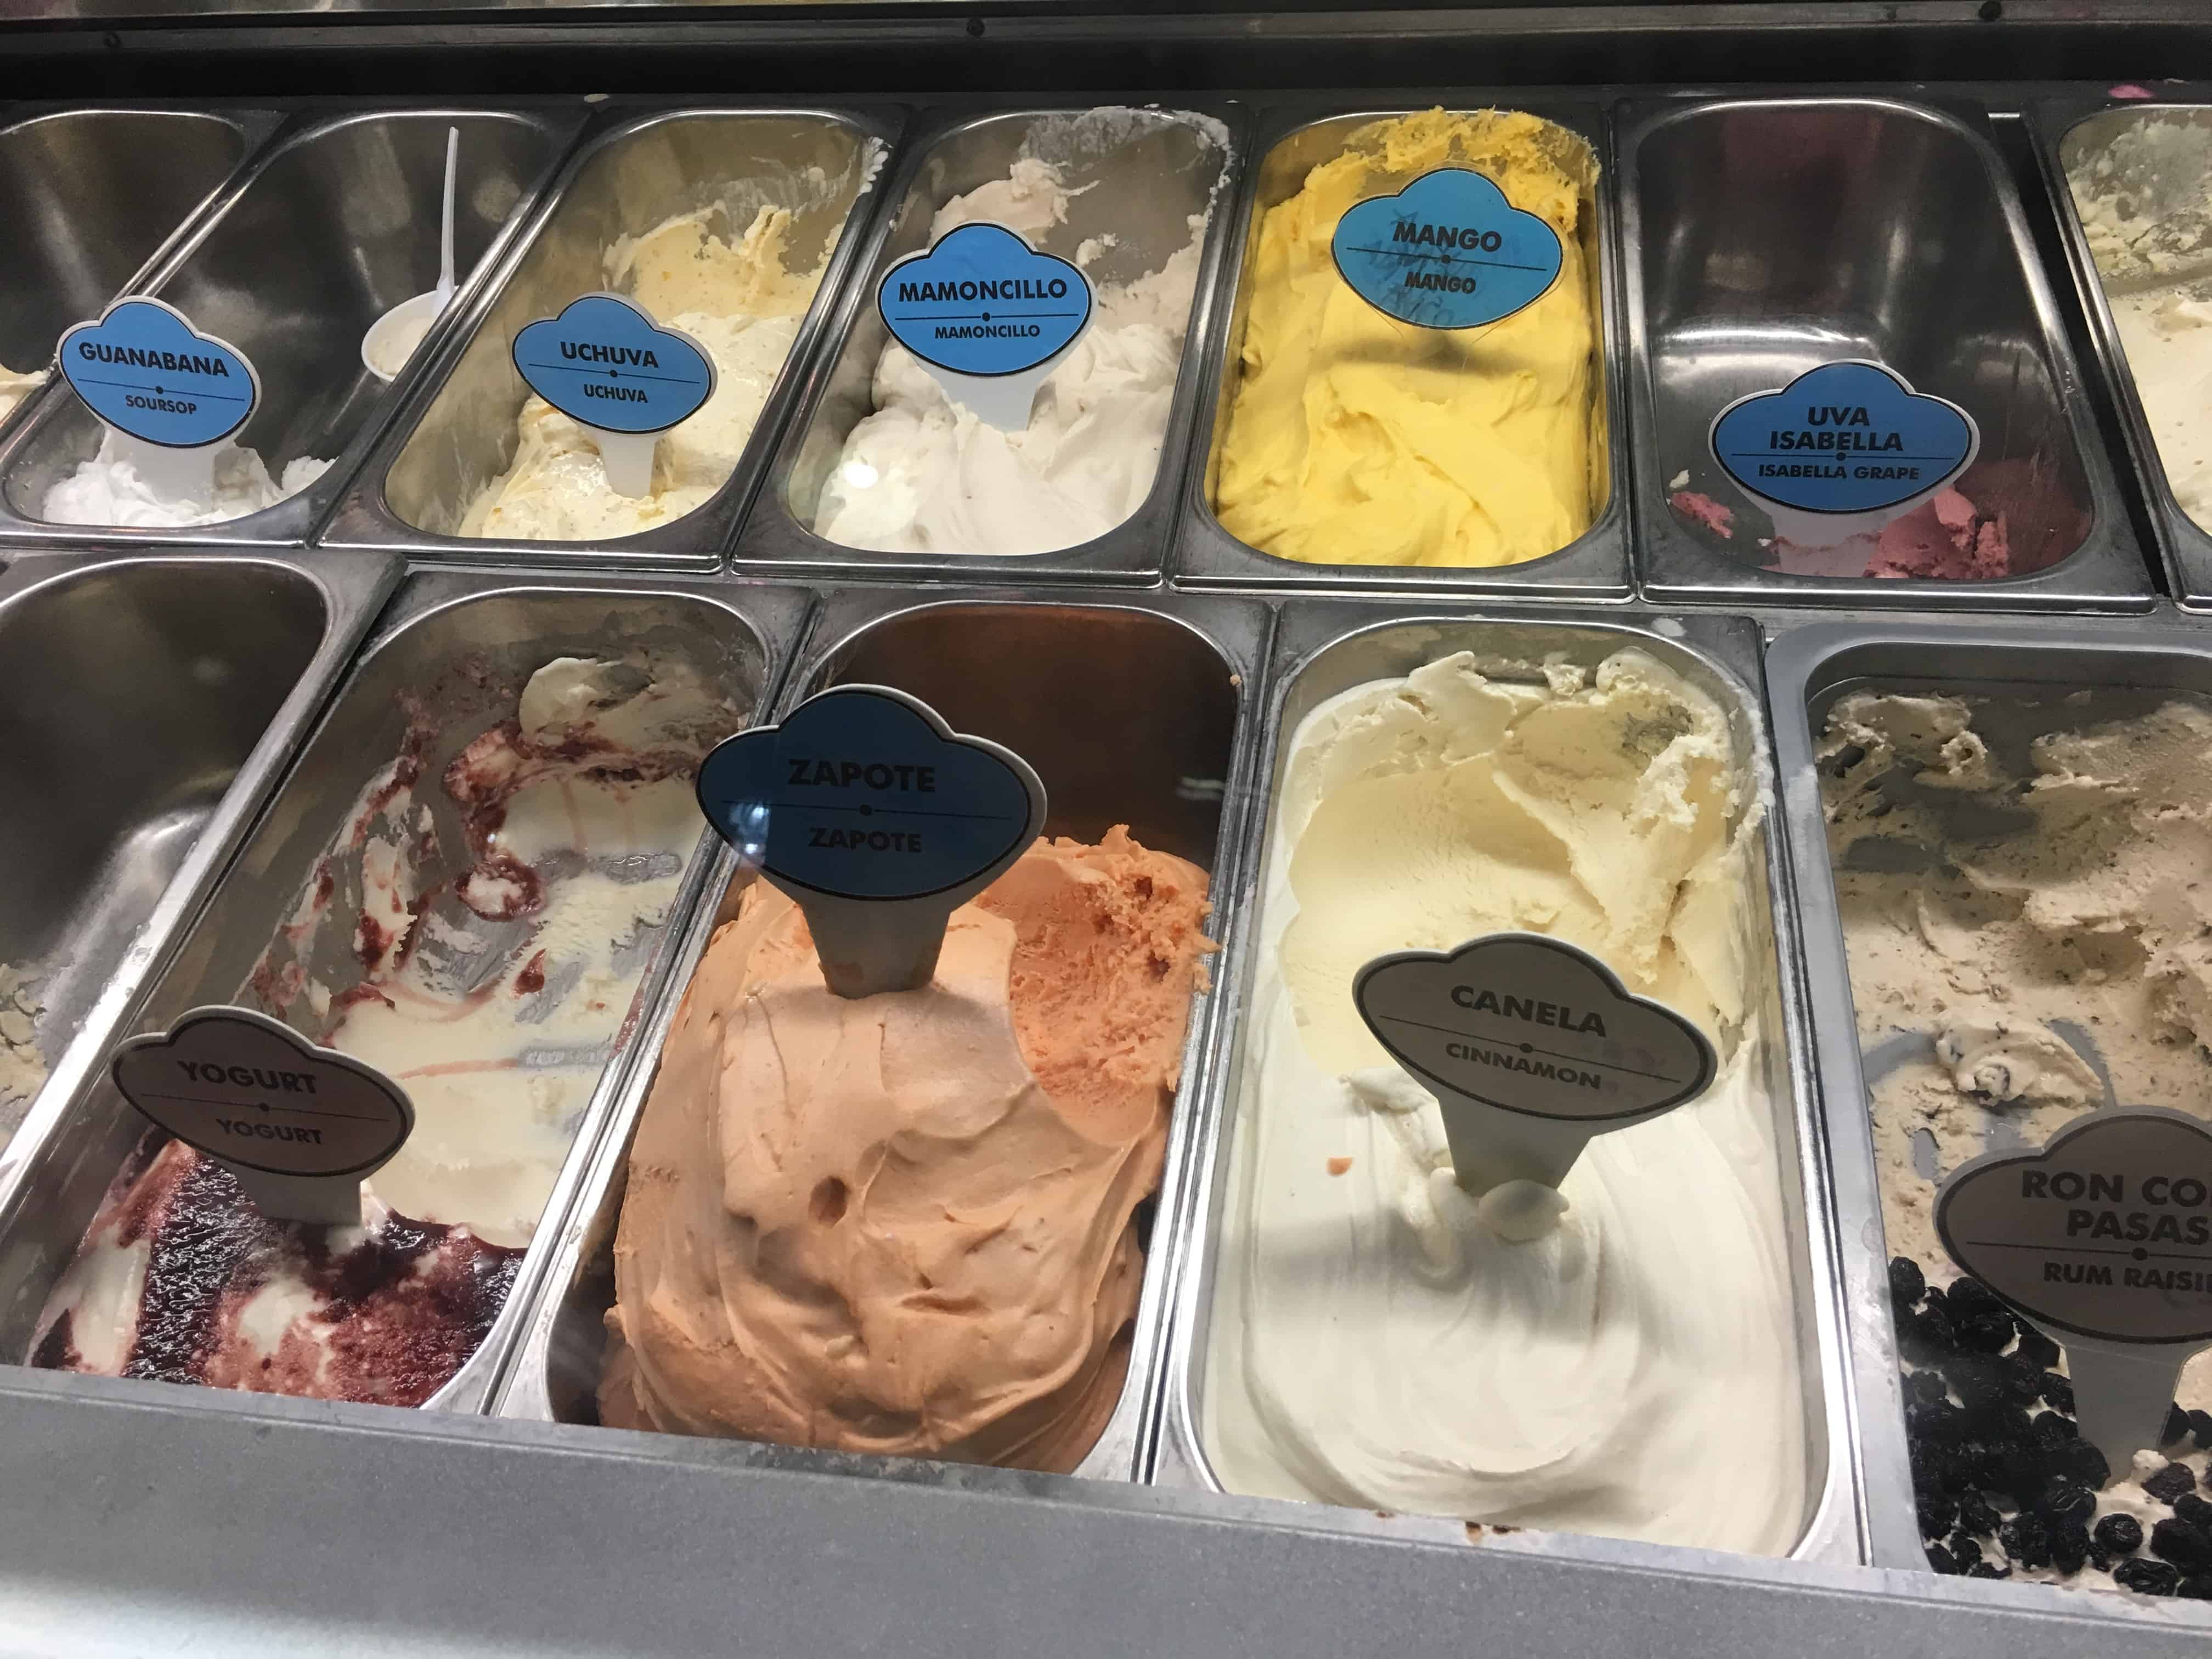 Some of the flavors at Gelatería Paradiso